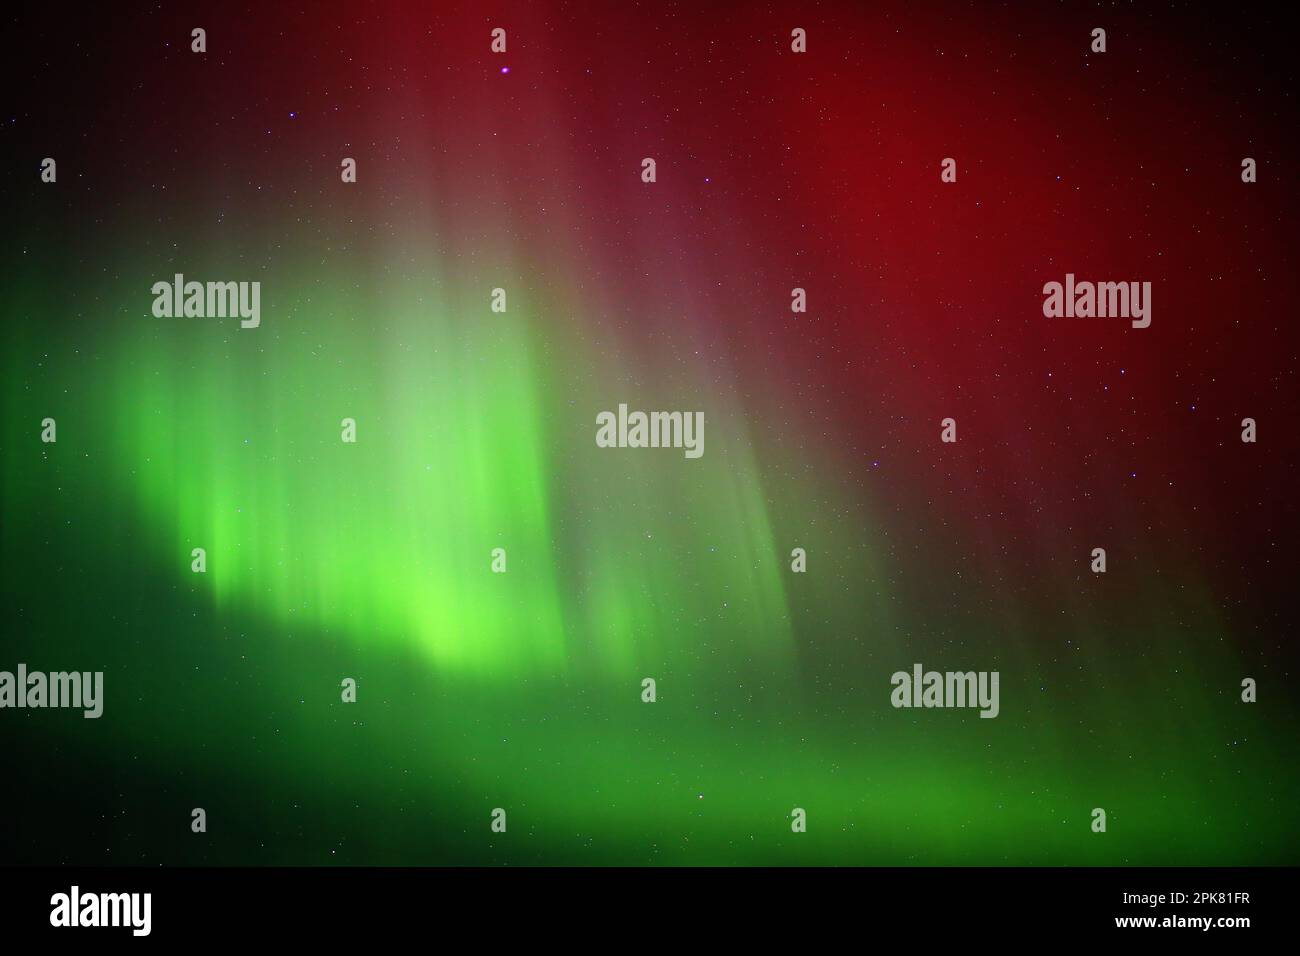 Red and green aurora borealis on starry sky. Stock Photo